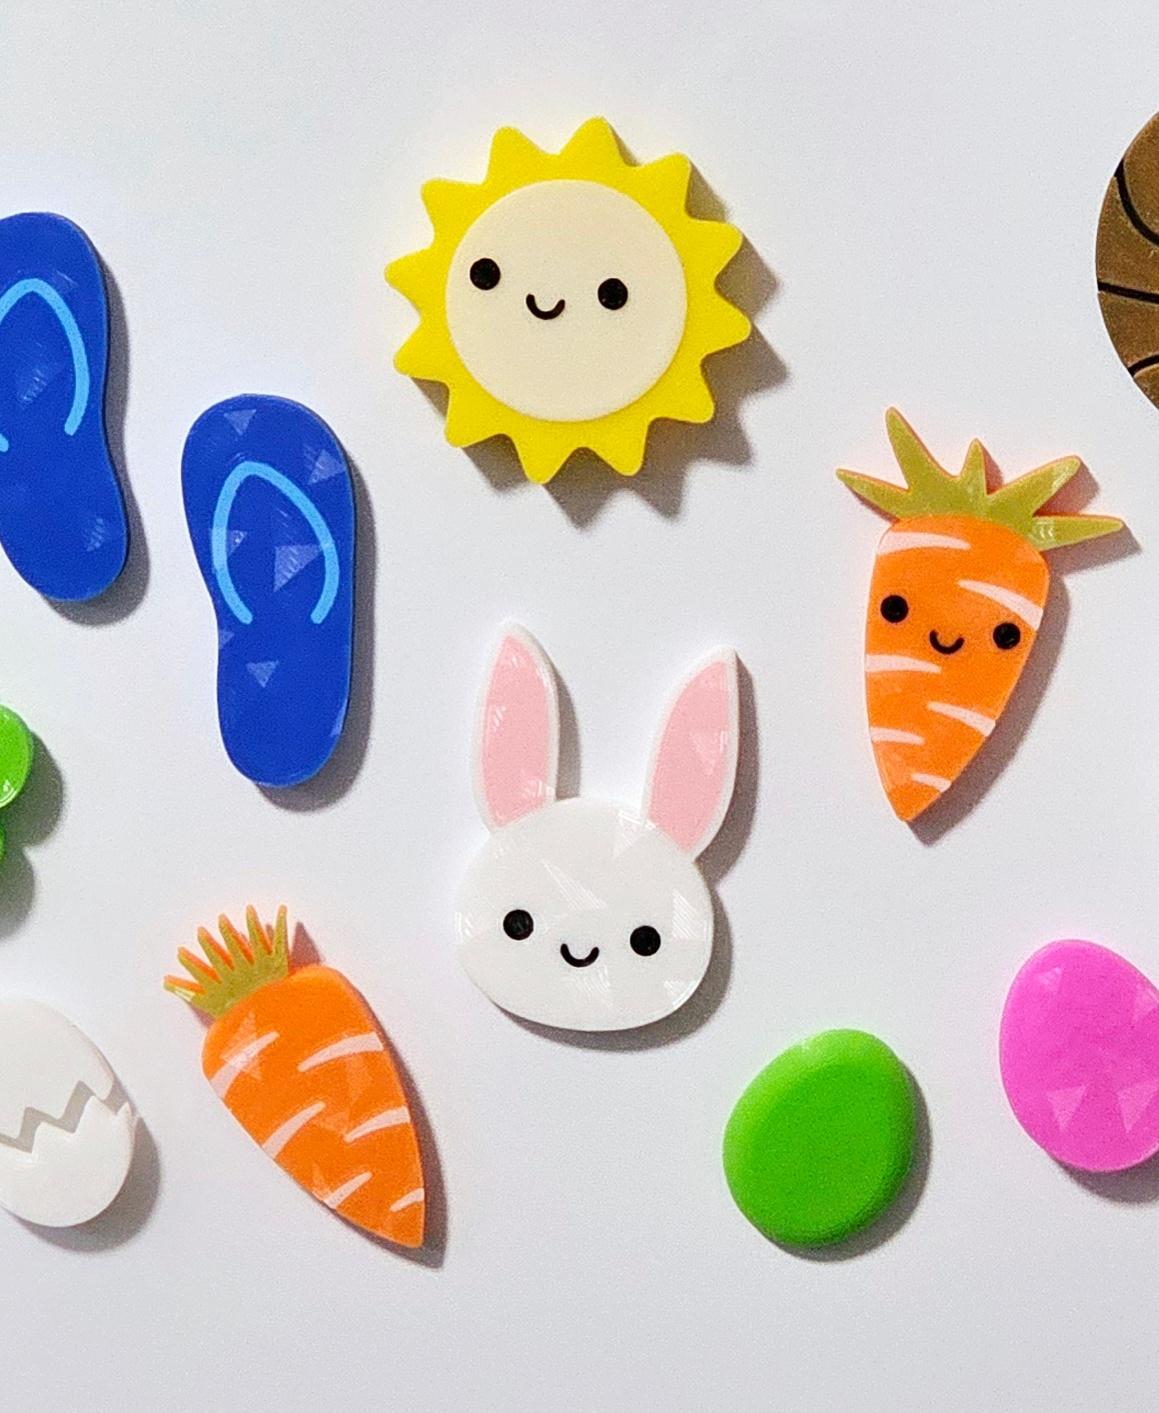 March Magnets - Day 13 #marchmagnets | Kawaii Carrot 3d model